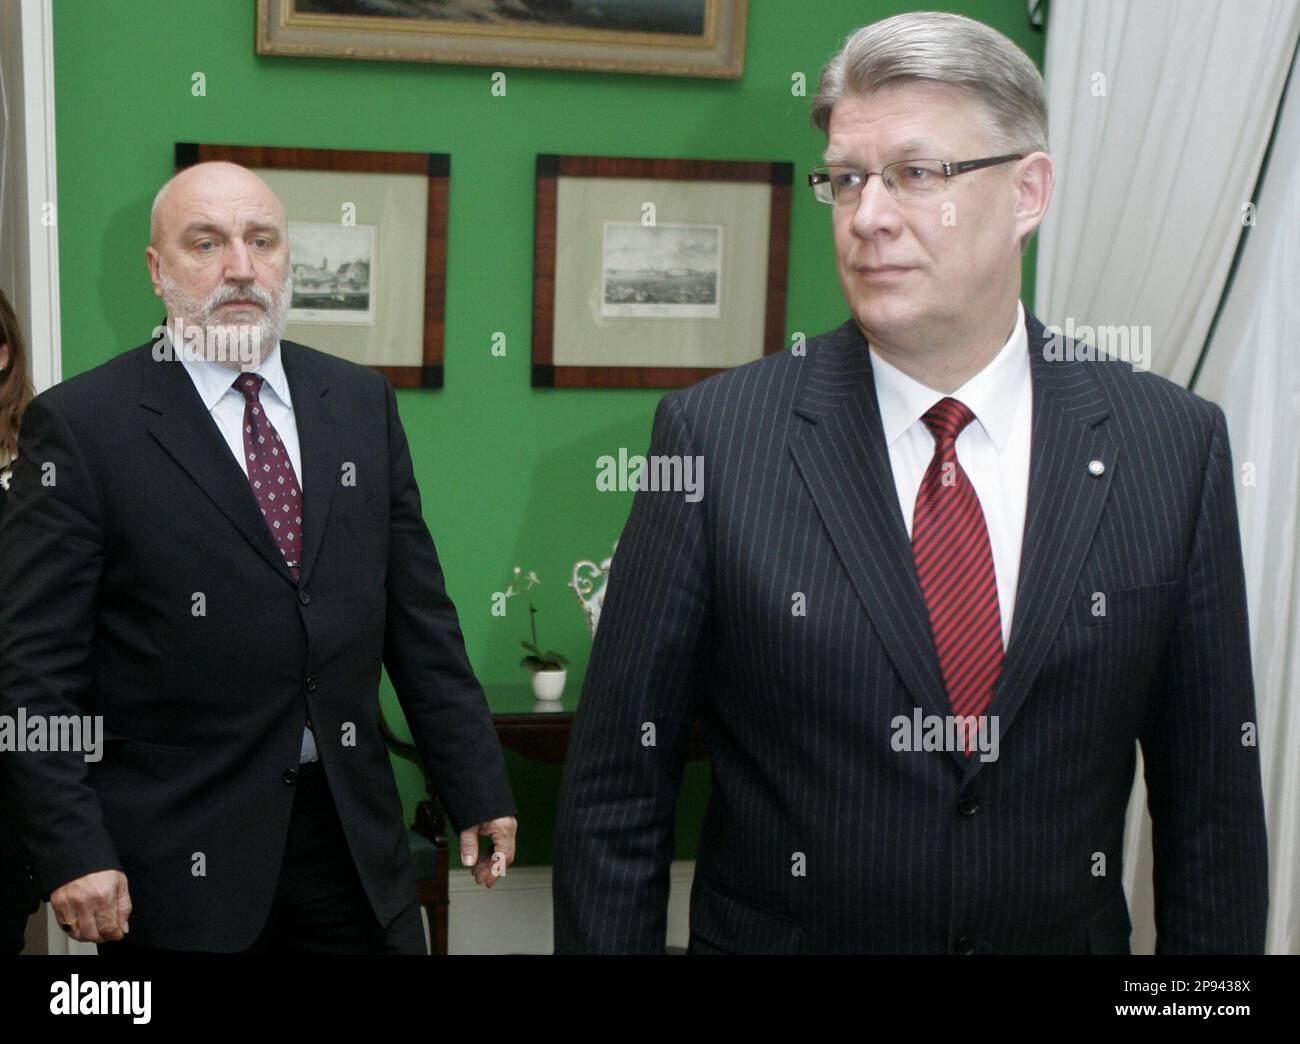 Latvian President Valdis Zatlers and Prime Minister Ivars Godmanis seen during their meeting in Riga, Latvia, Friday, Feb. 20, 2009. President Valdis Zatlers said he accepted the resignation of Prime Minister Ivars Godmanis and his administration, which had been in power since December 2007. Latvia's center-right coalition government resigned Friday after weeks of instability brought on by the Baltic country's economic collapse. (AP Photo) Banque D'Images